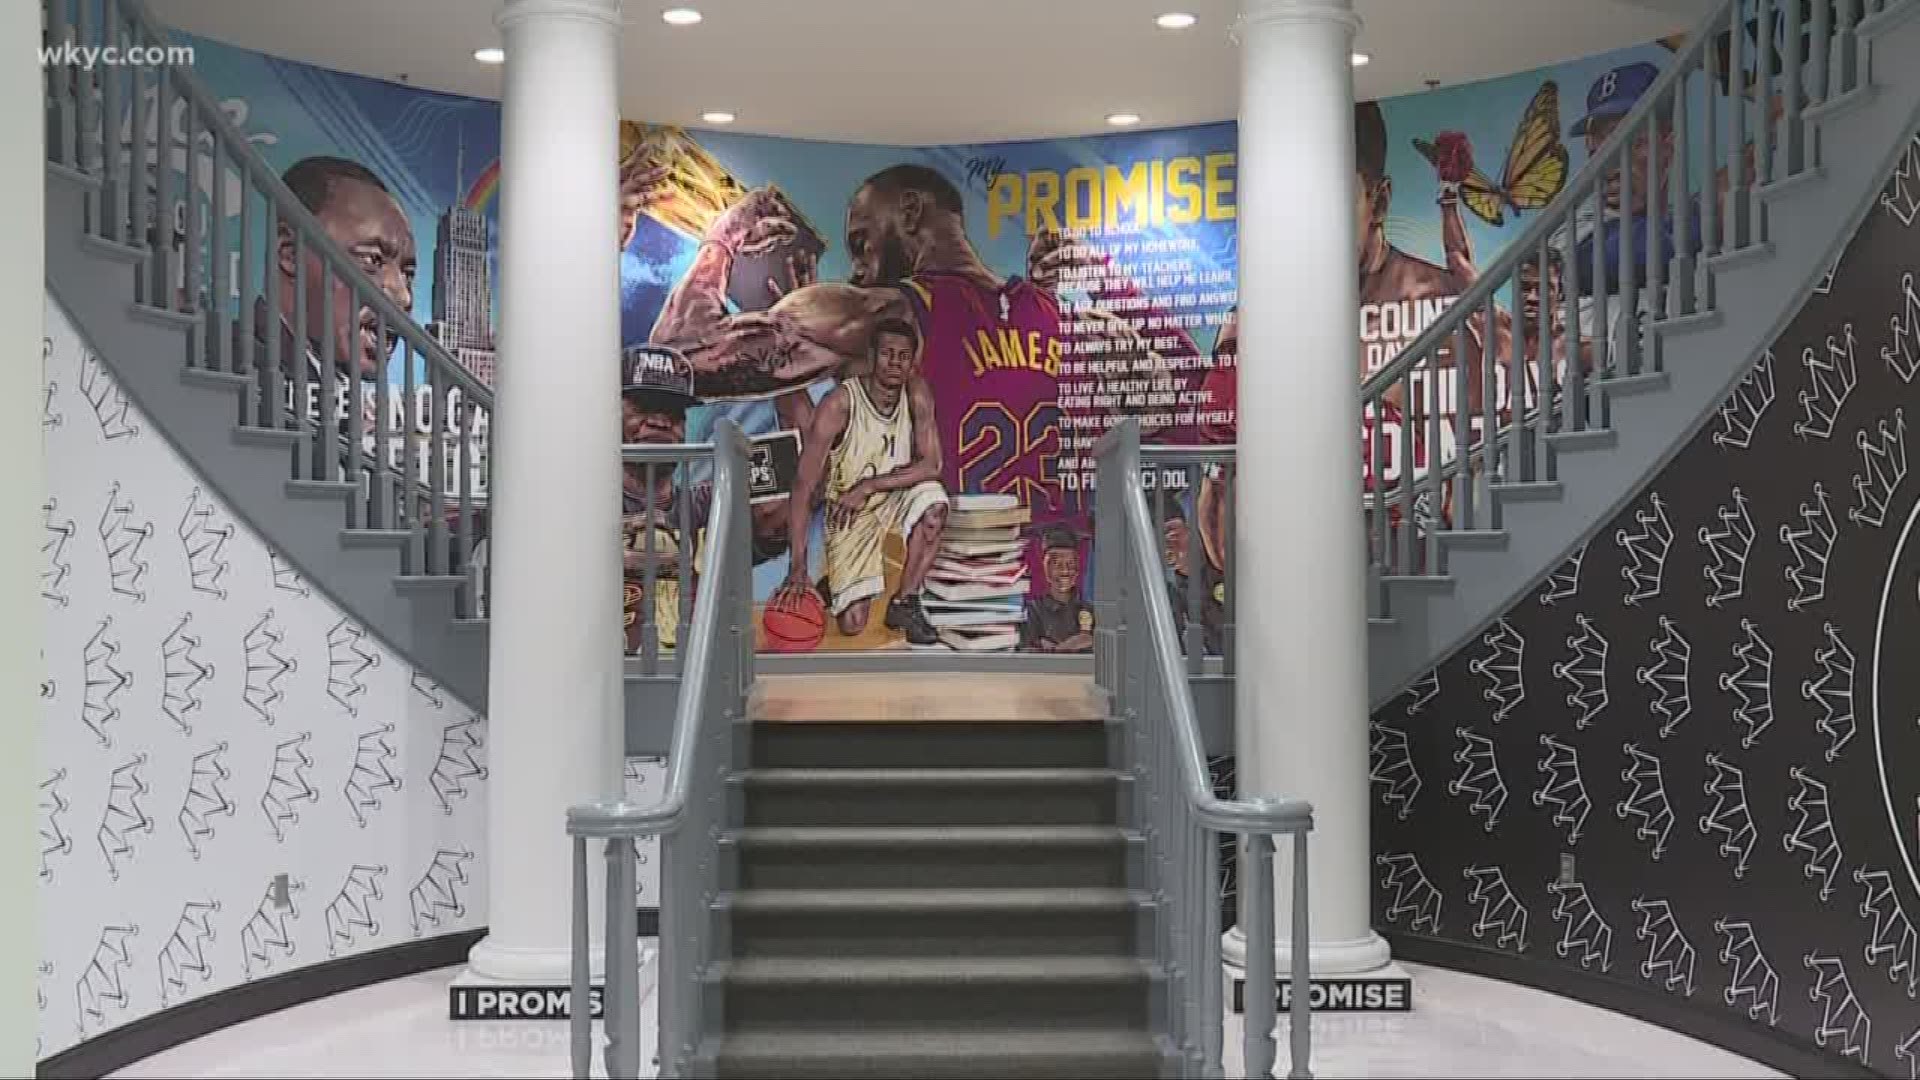 LeBron James has the 'jitters' as I PROMISE school opens in Akron | wkyc.com